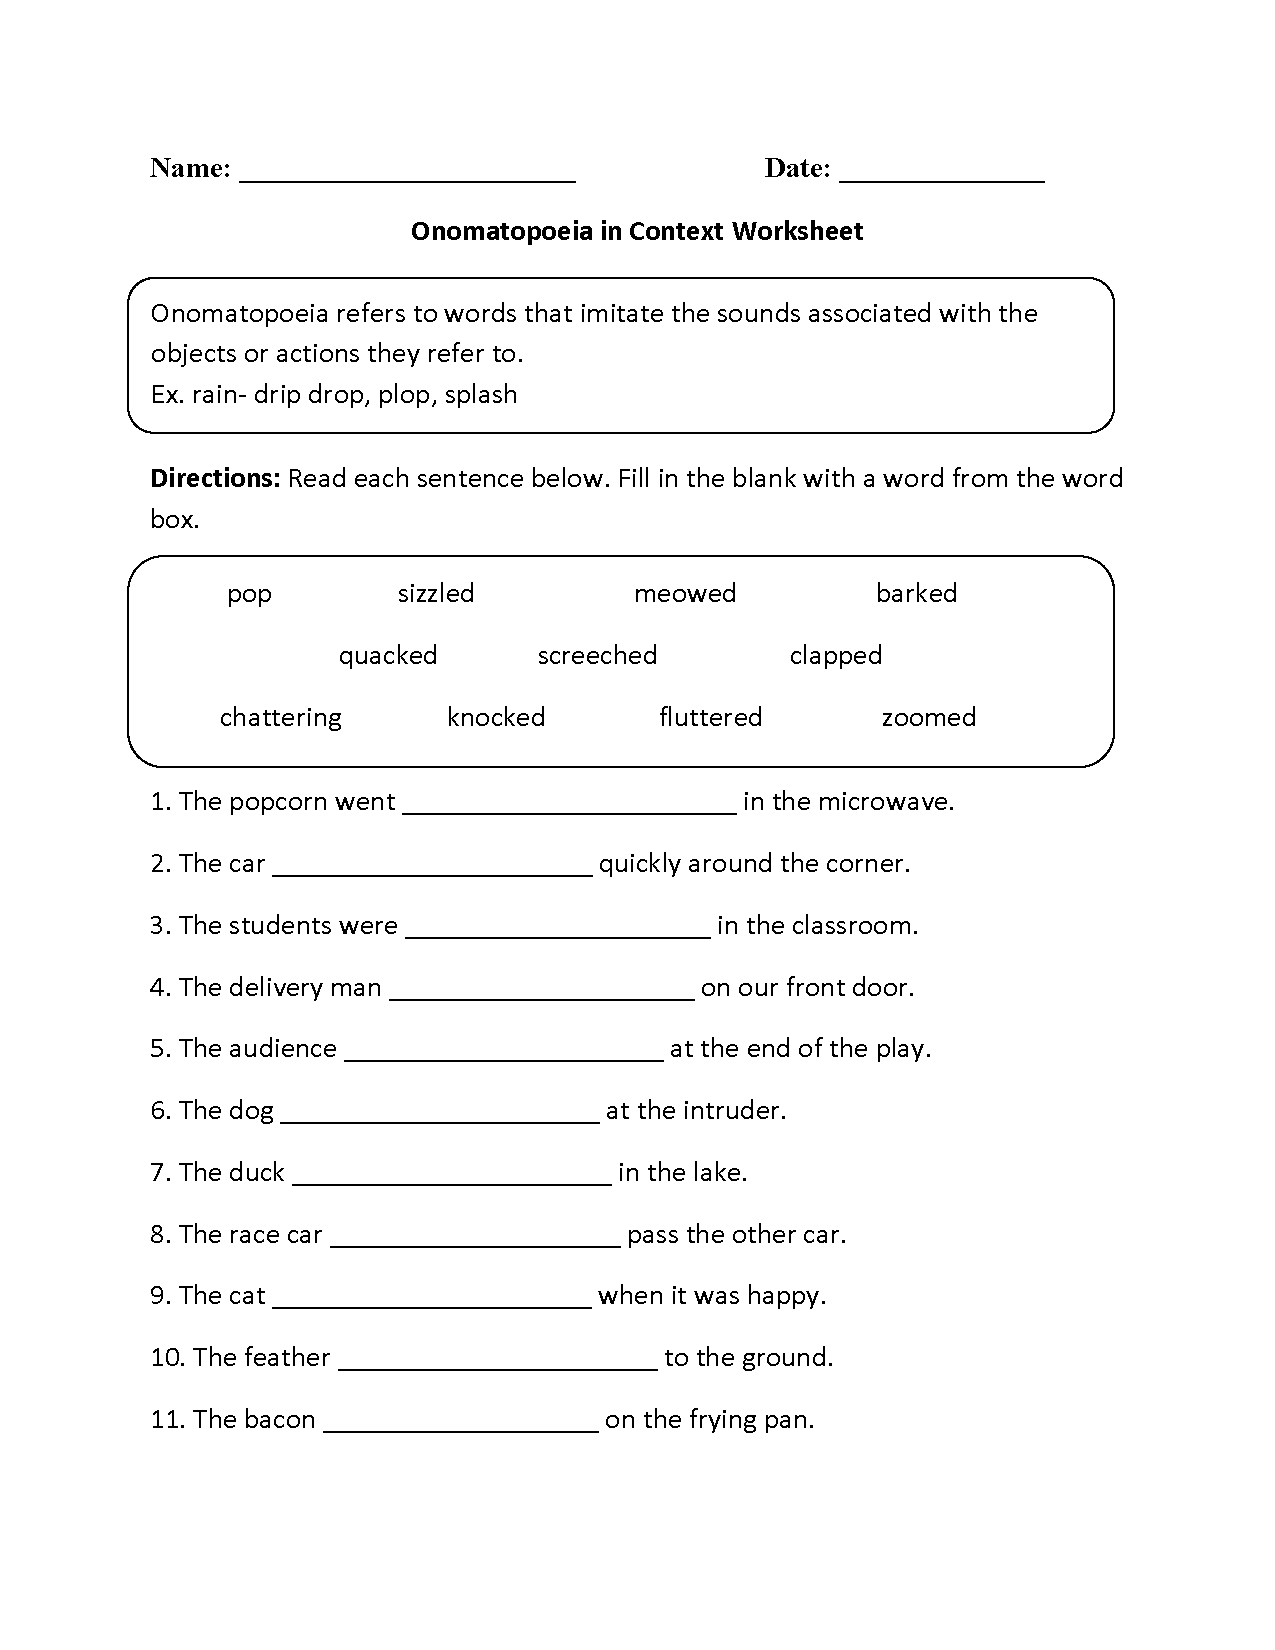 English Worksheets Middle School Image